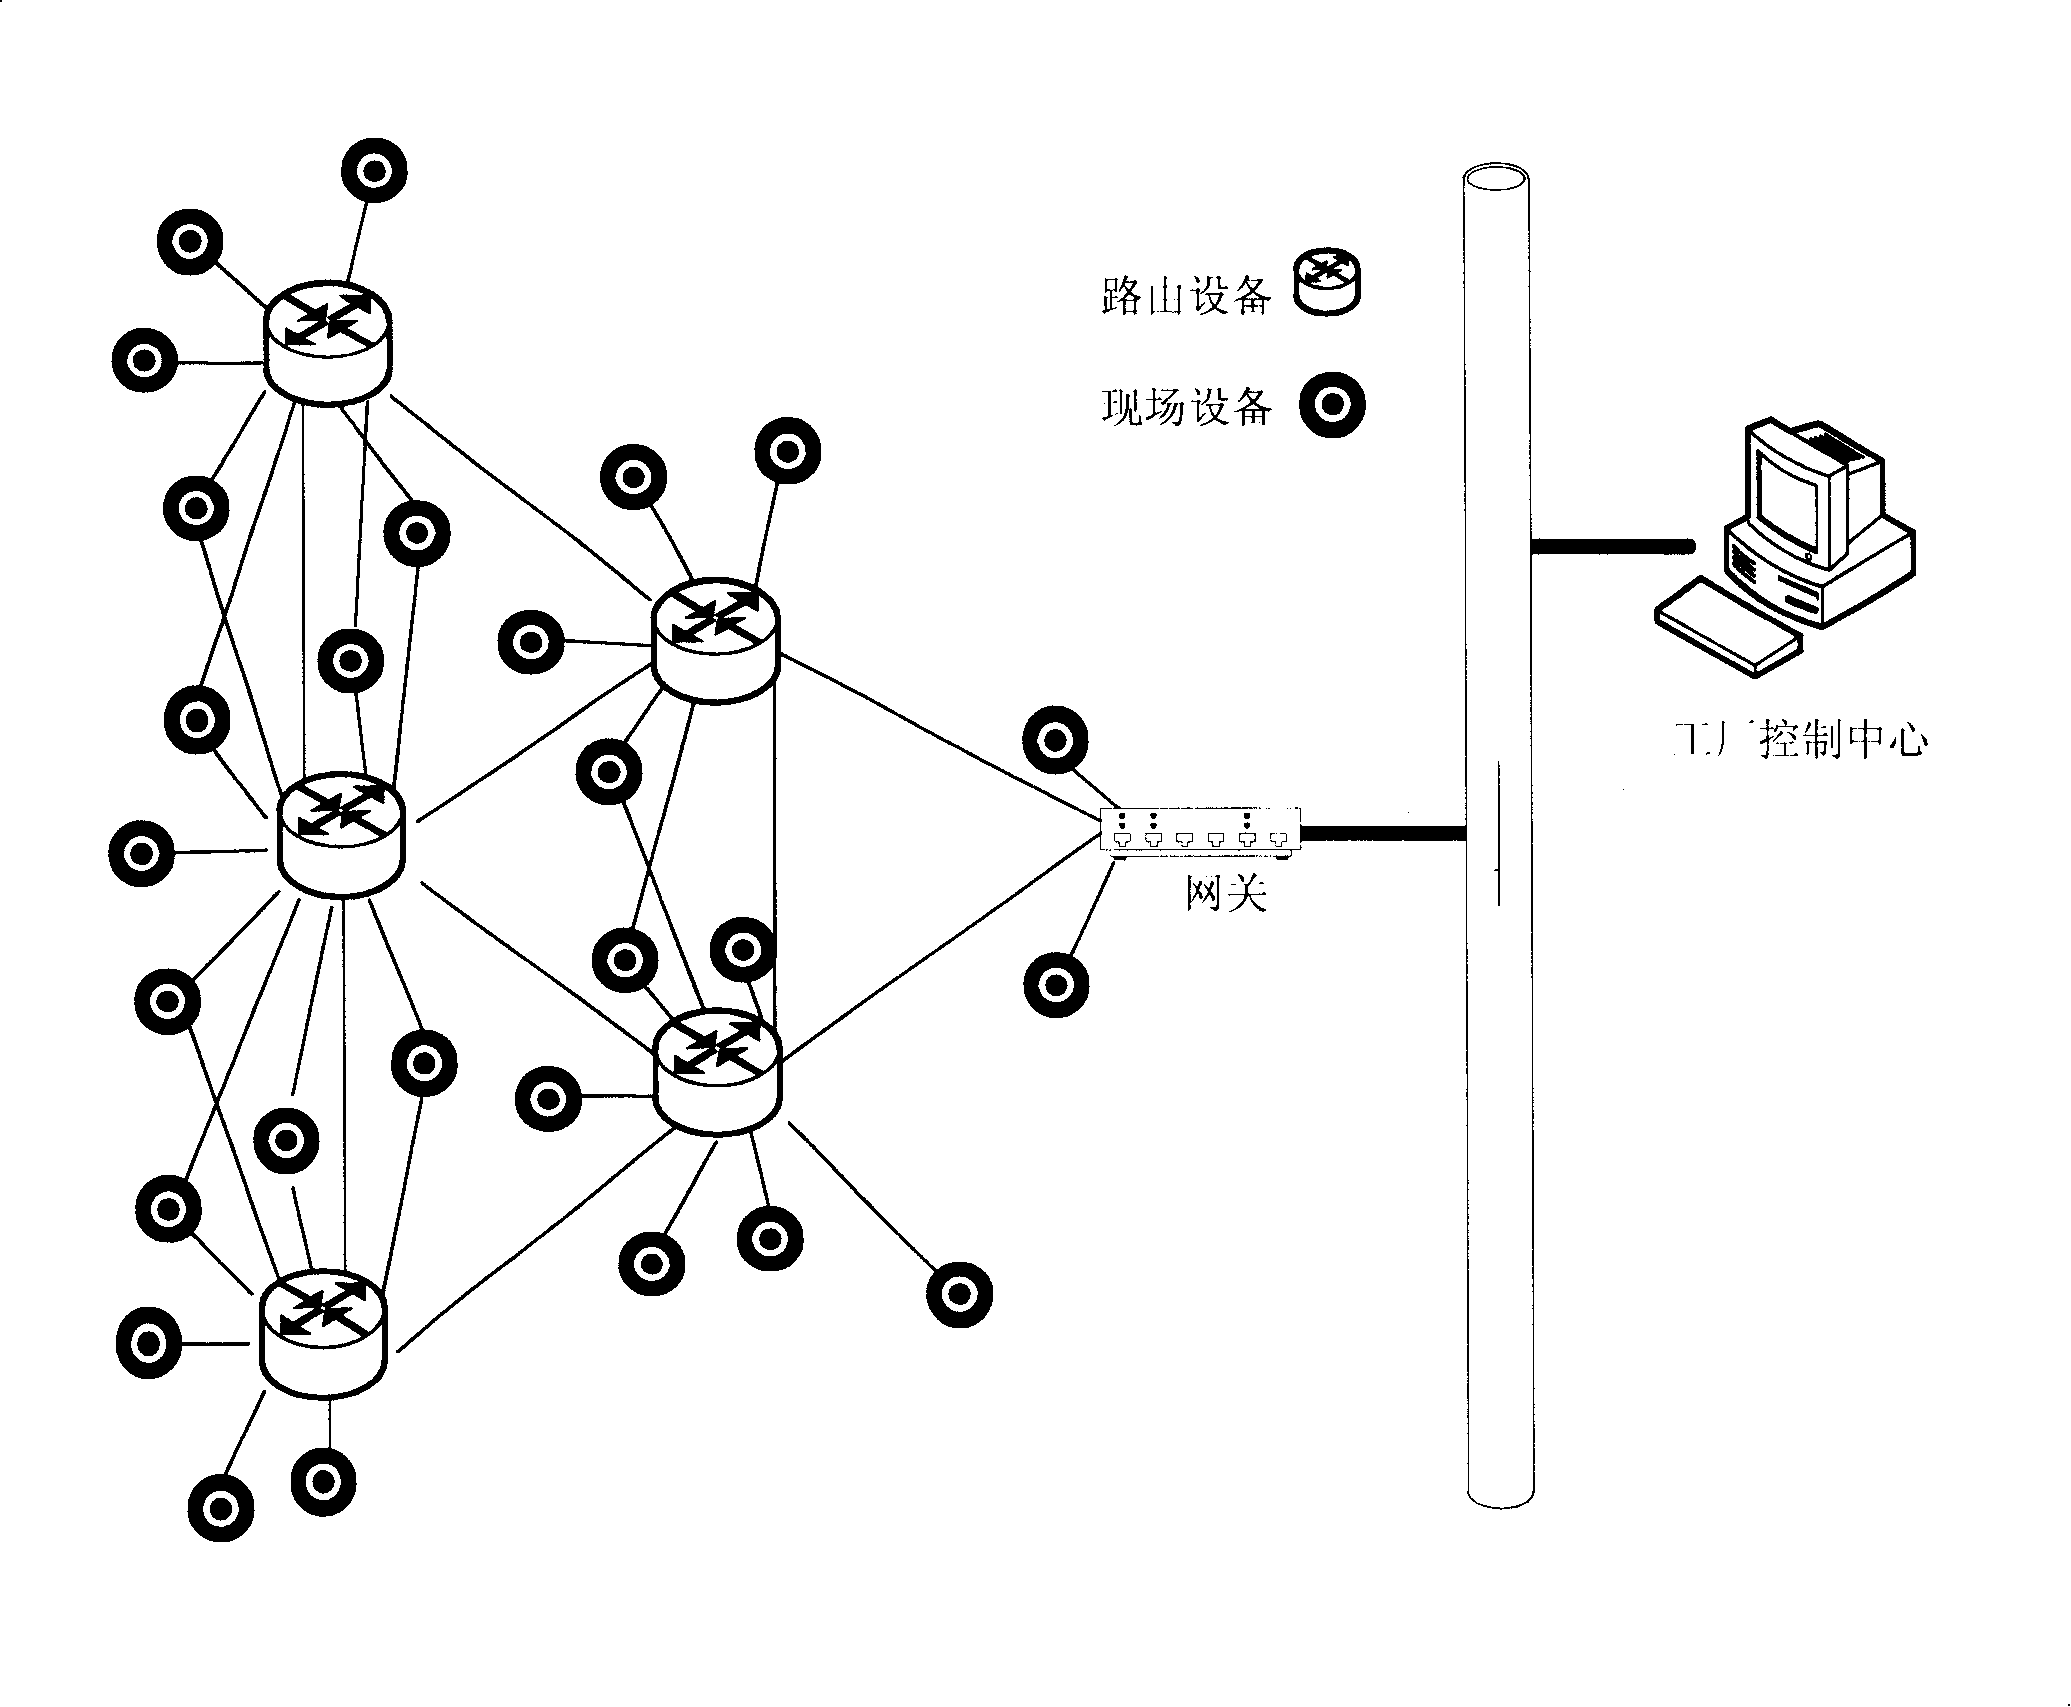 A media access control mechanism based on wireless mesh network